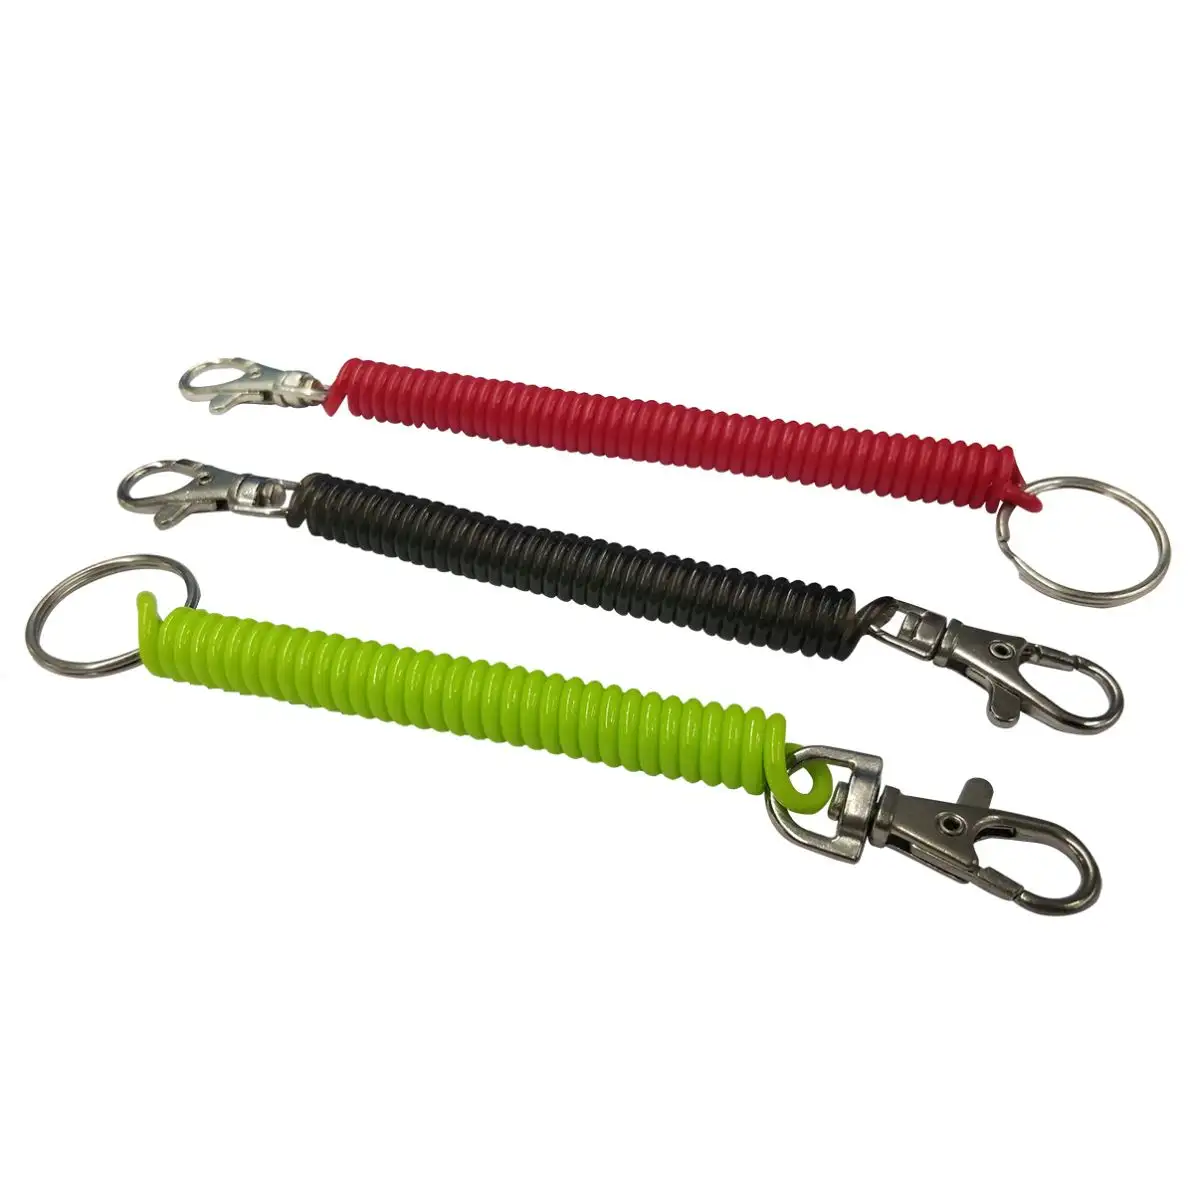 Bungee Springs Plastic Coil Cord Lanyard Keychain Wristband Low Price Factory Paracord Keychain With Carabiner